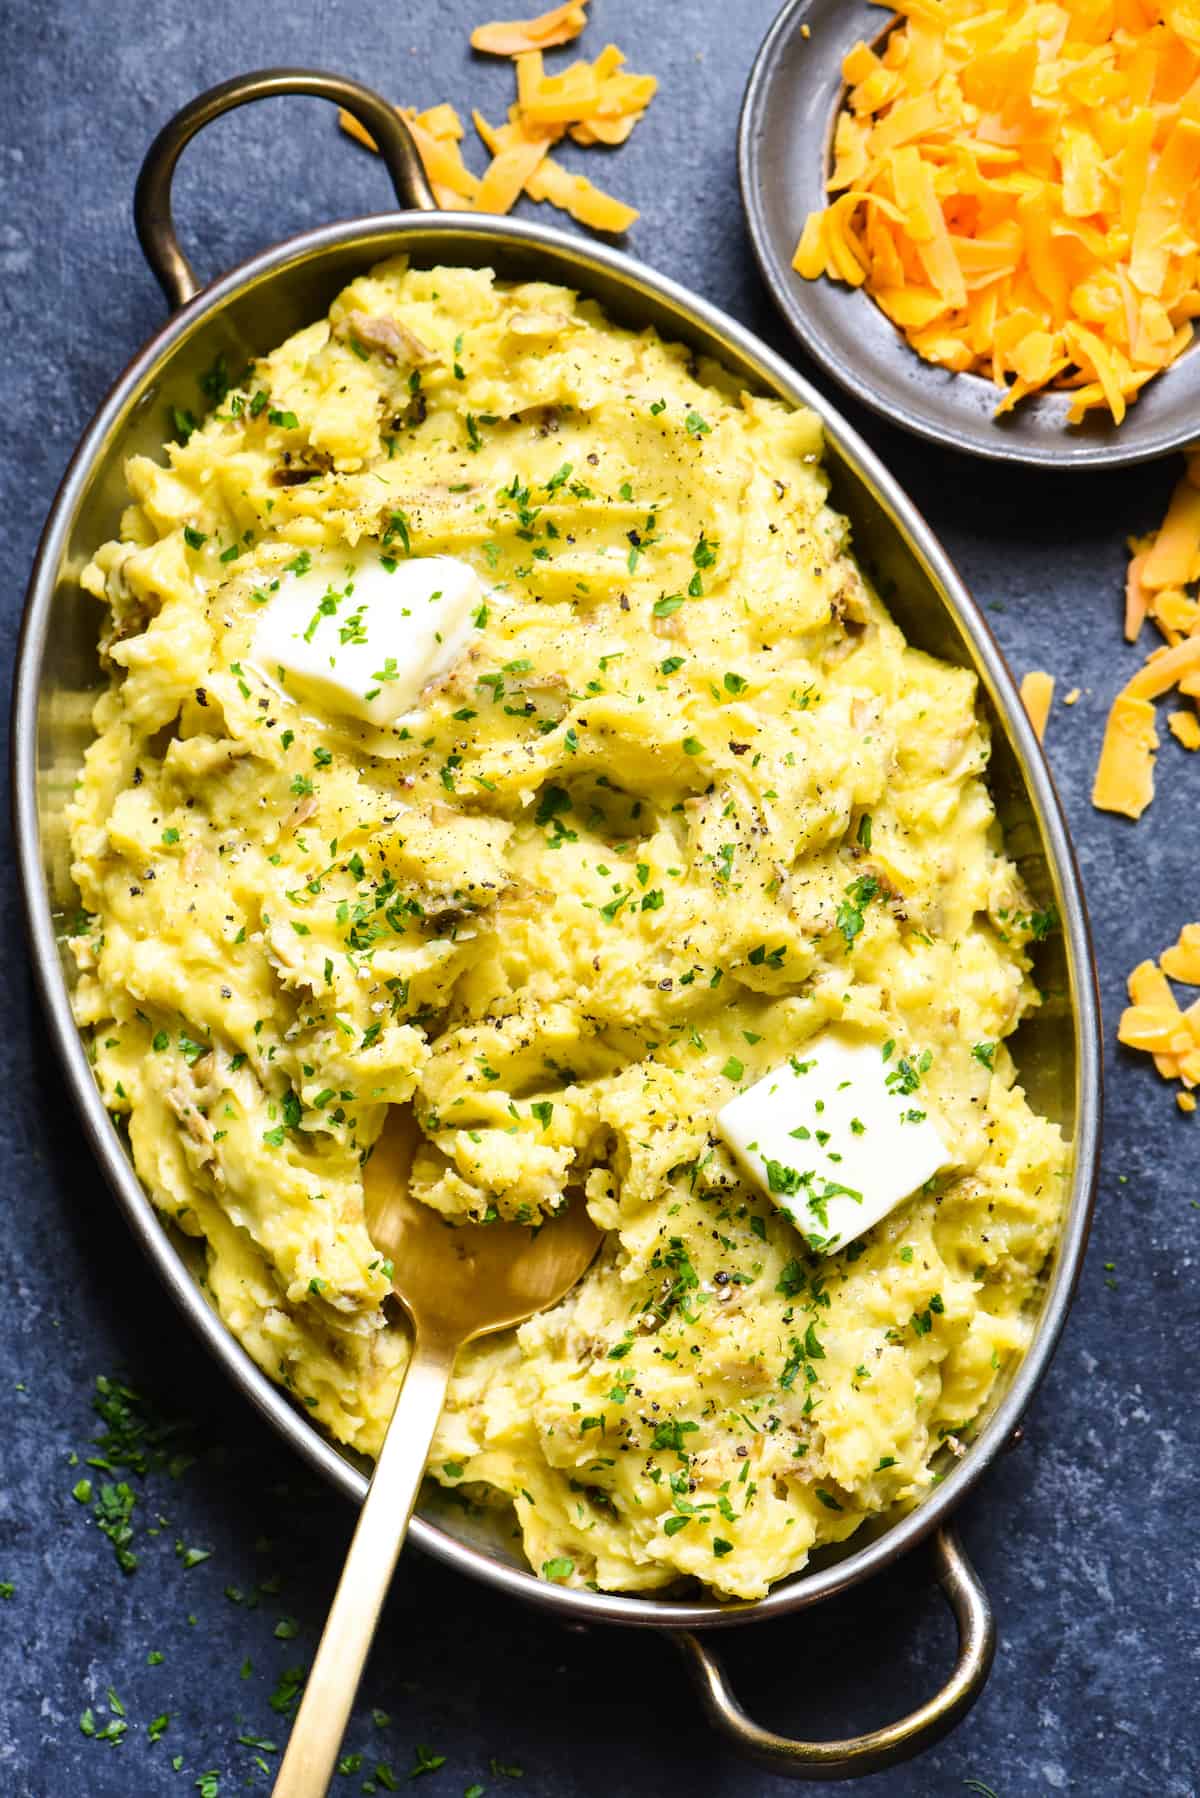 Aged Cheddar Mashed Potatoes - The only thing better than mashed potatoes? CHEESY mashed potatoes! | foxeslovelemons.com